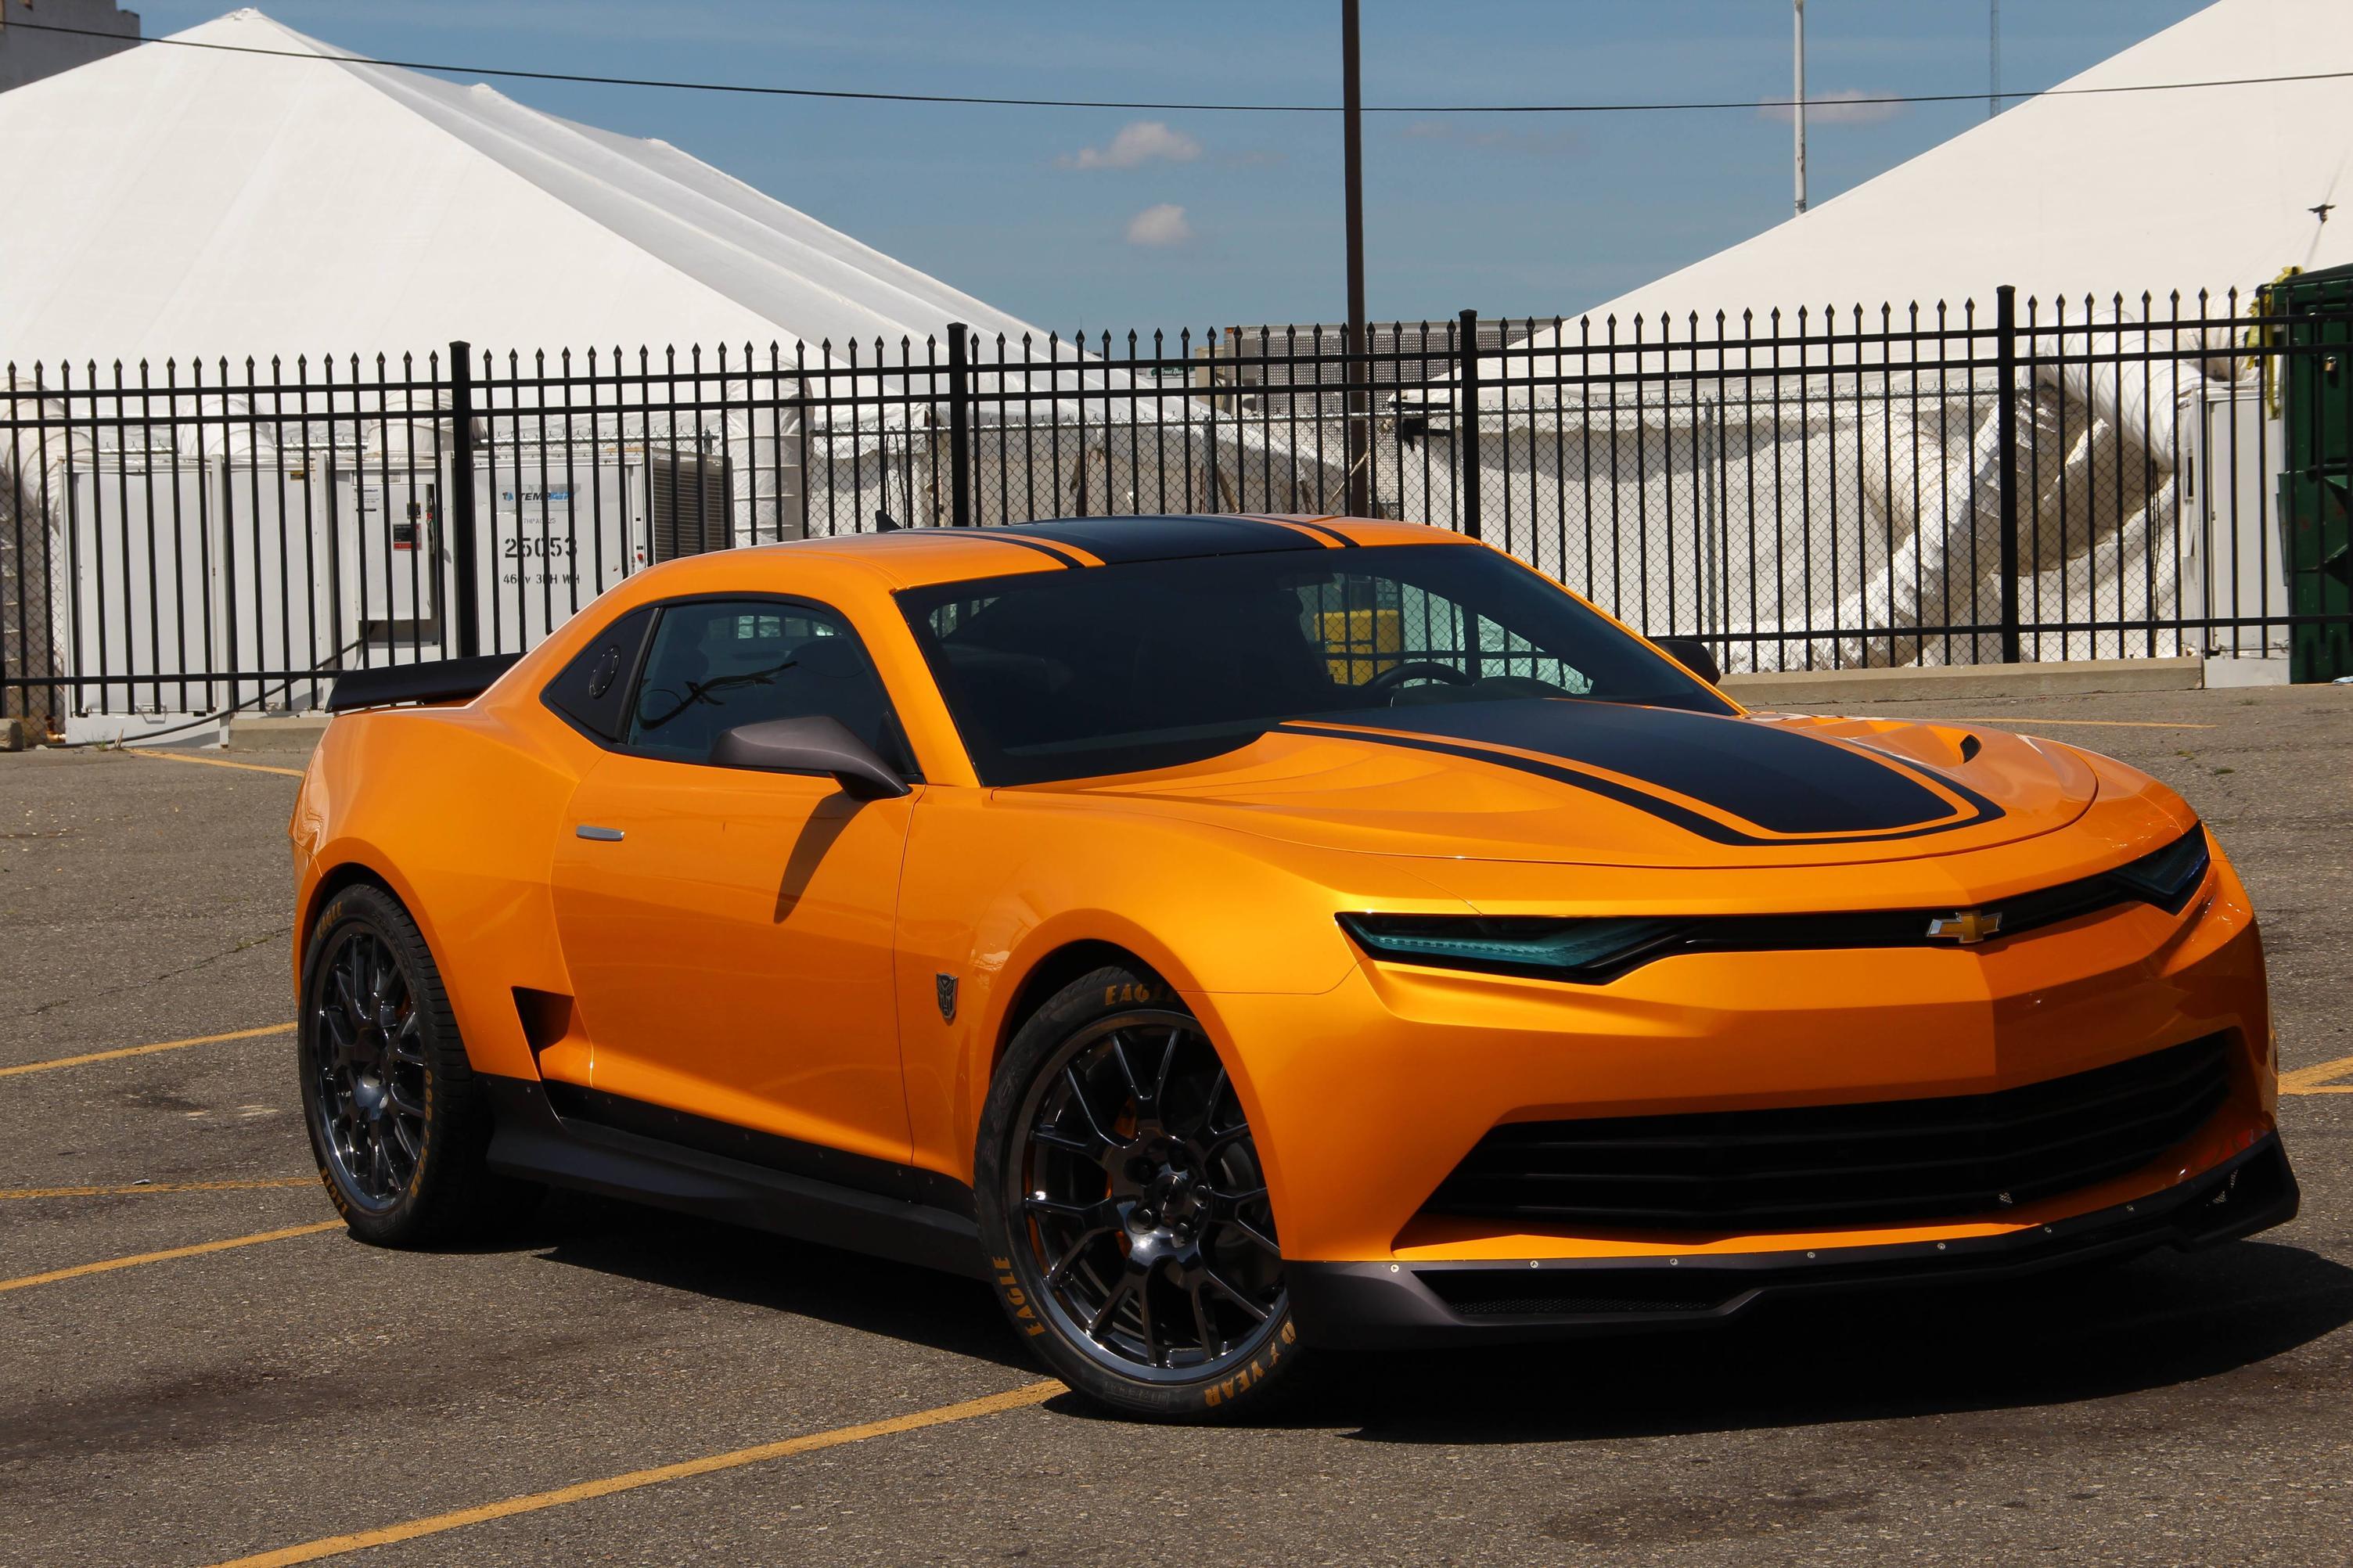 Transformers 4 Bumblebee Camaro spotted on set Pics and First